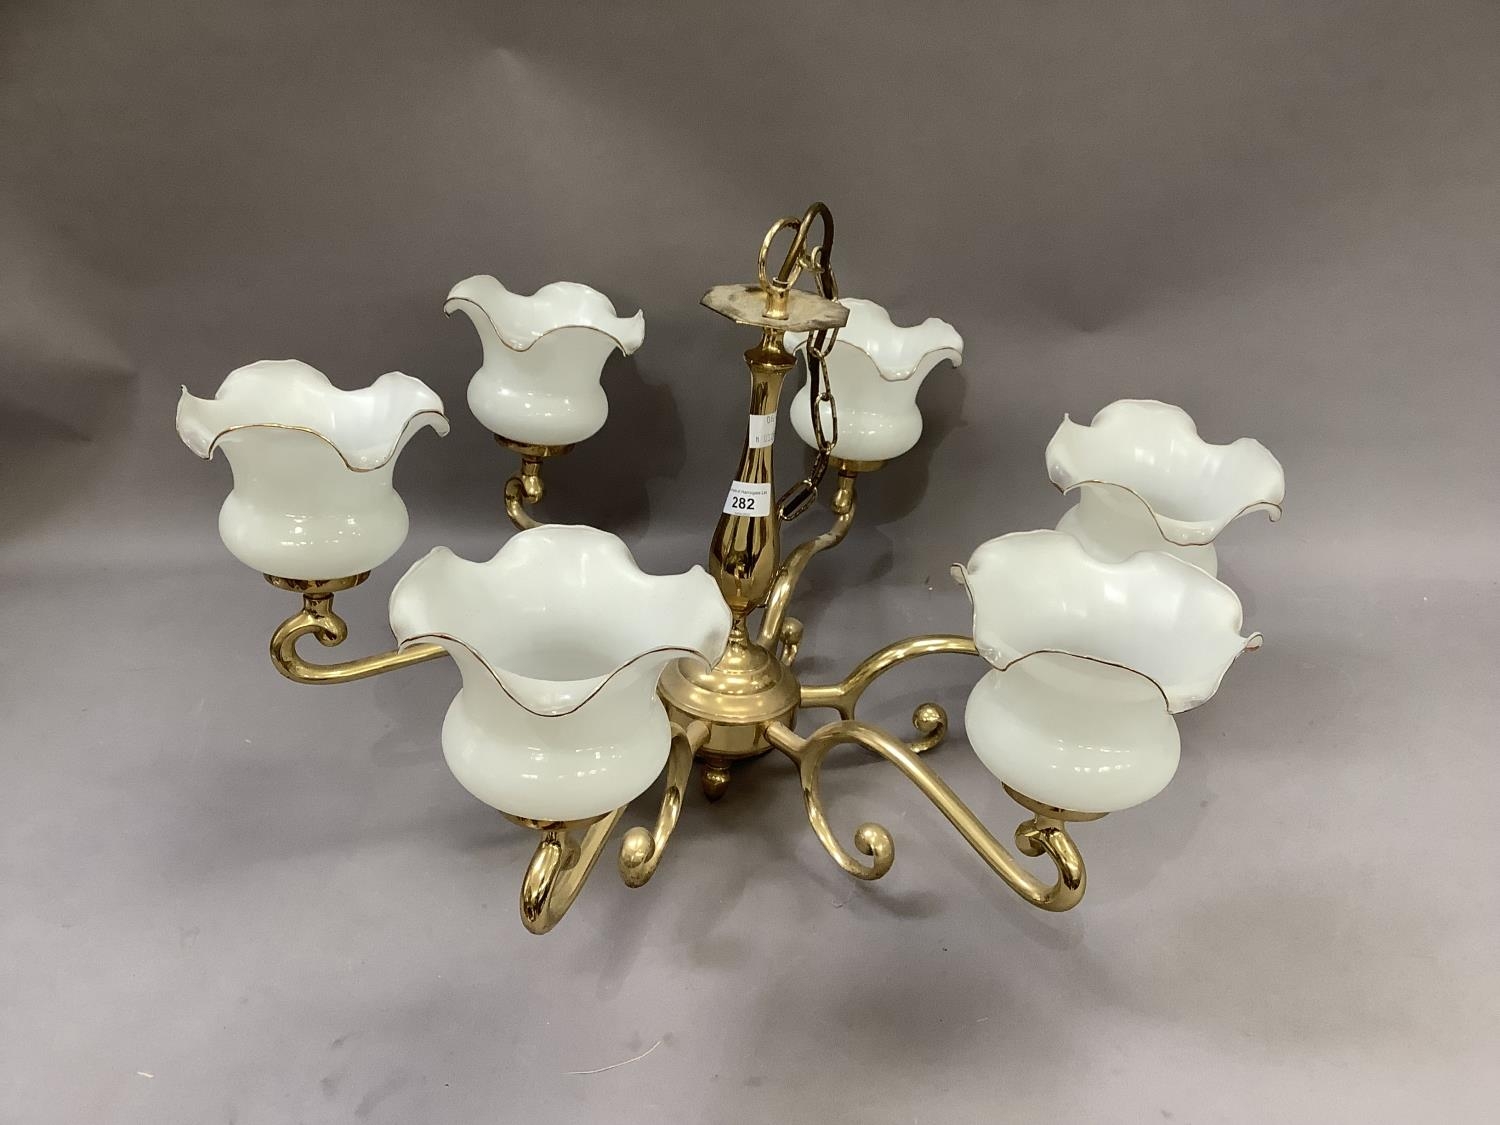 A brass six light chandelier with six white glass shades